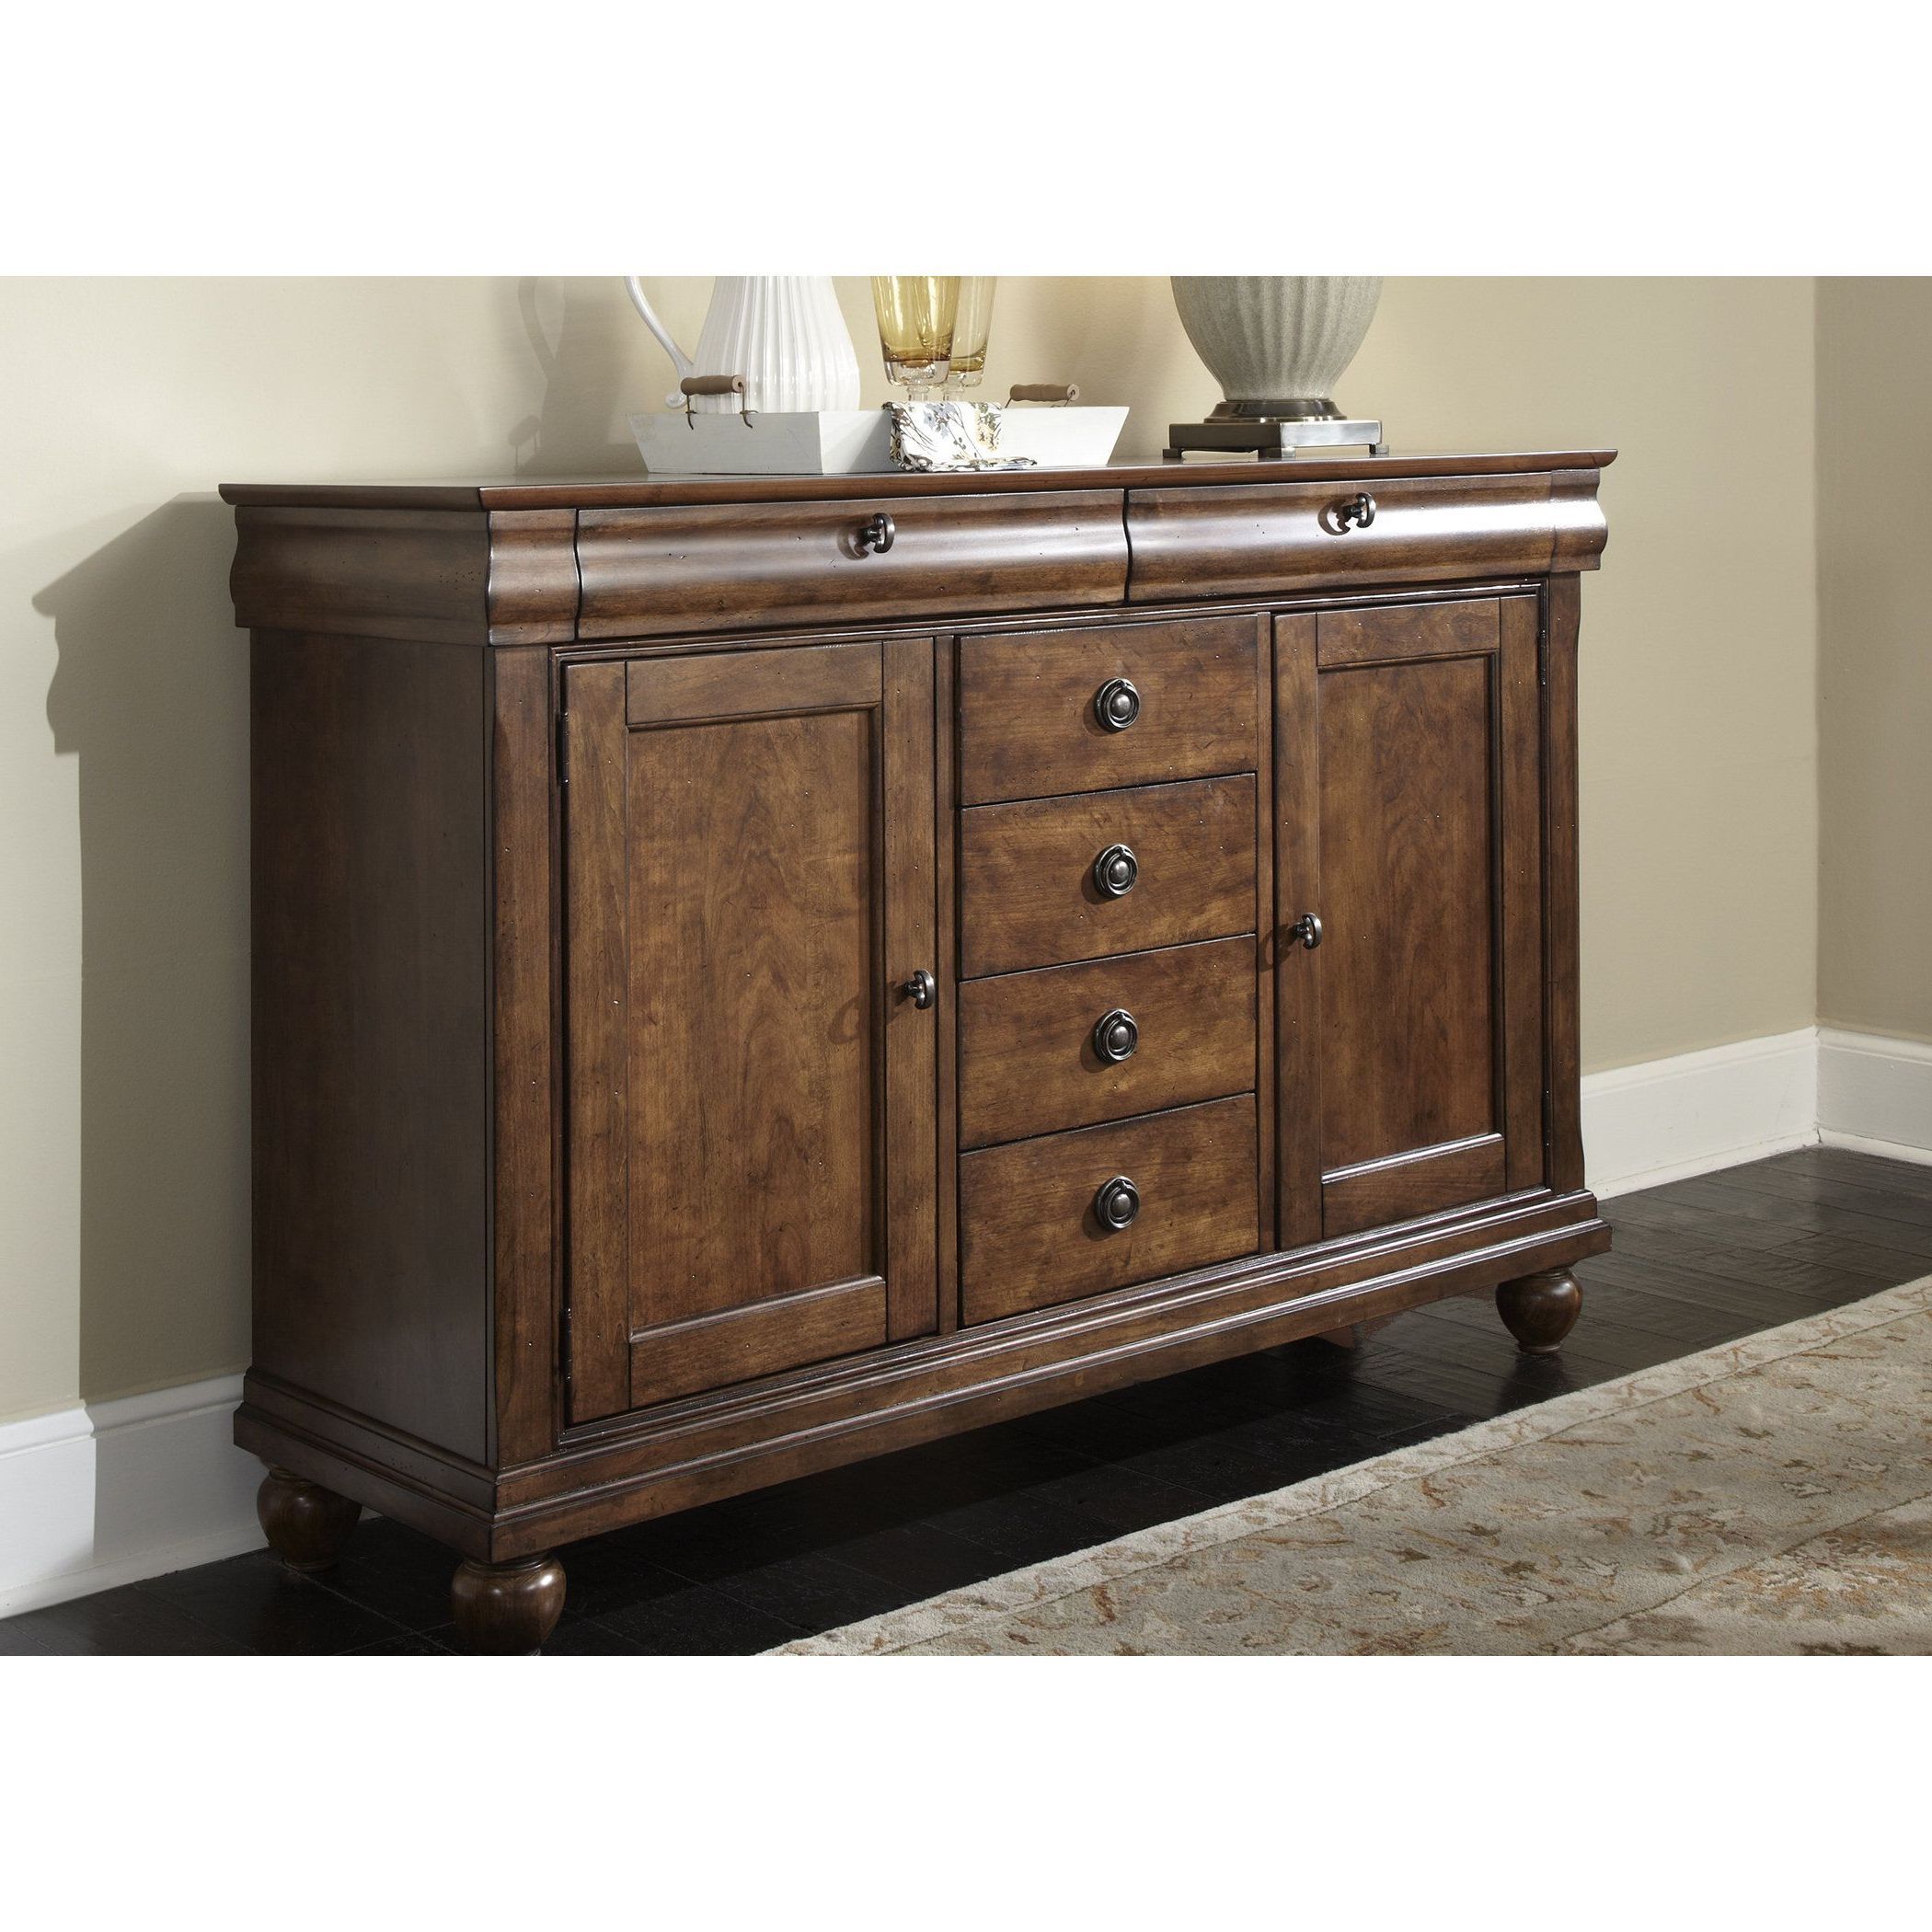 Chalus Sideboards Throughout Most Recently Released Liberty Rustic Tradition Cherry Server, Brown (View 7 of 20)